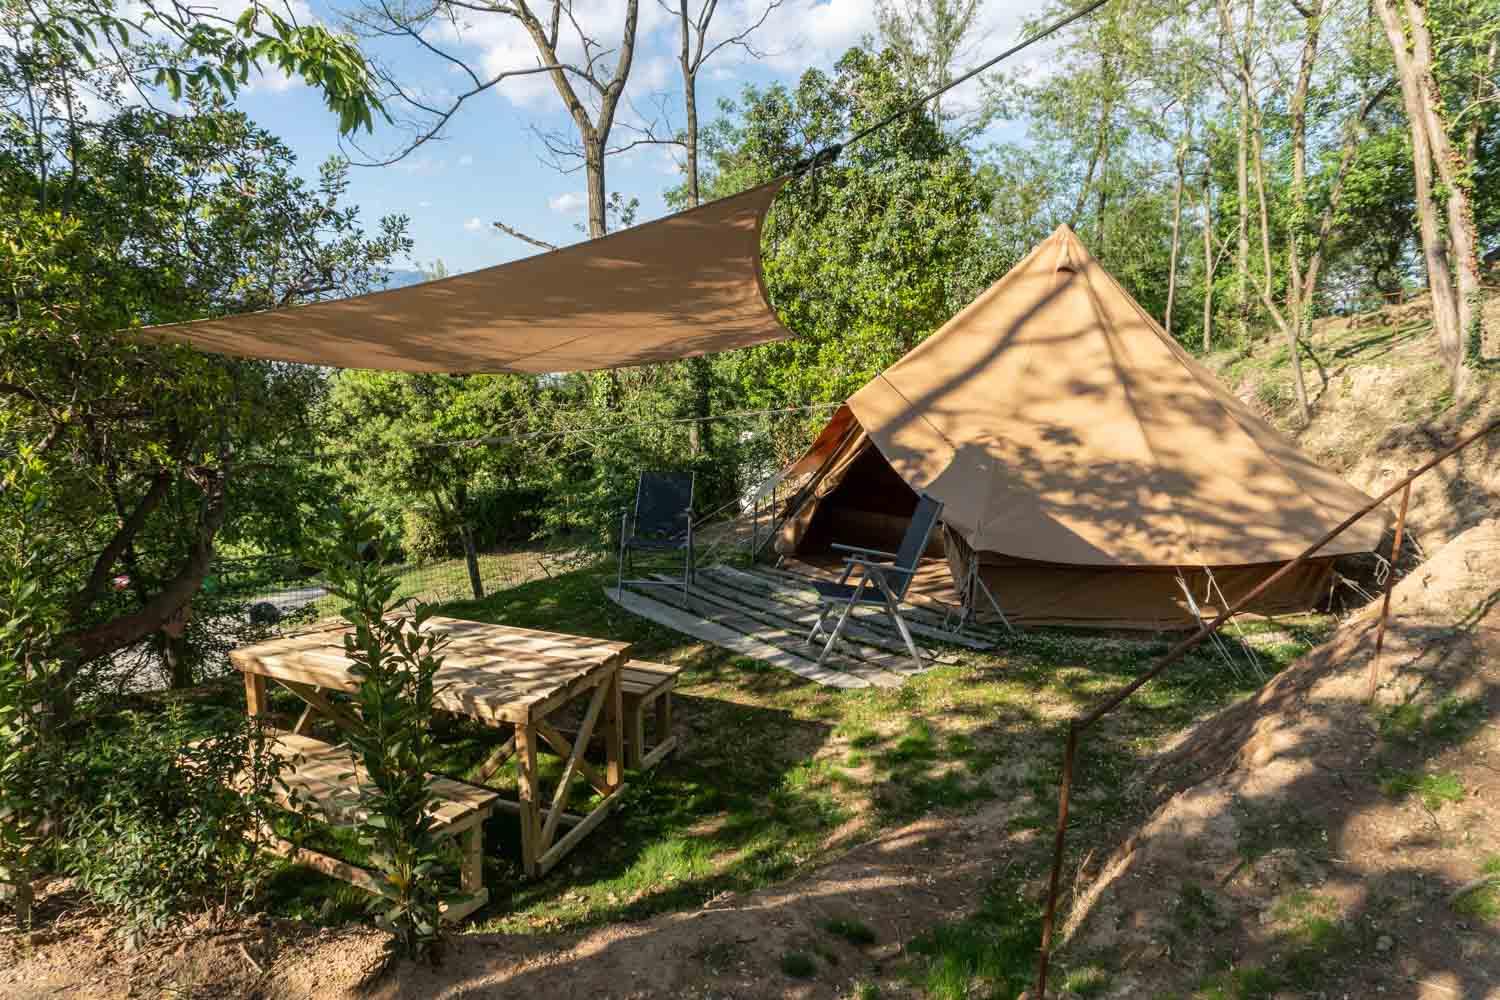 Accommodation - Wild, Bell Tent, Circular, With Double Bed, Two Single Beds, Rustic Outdoor Table, Four Chairs And A Hammock - Camping Barco Reale